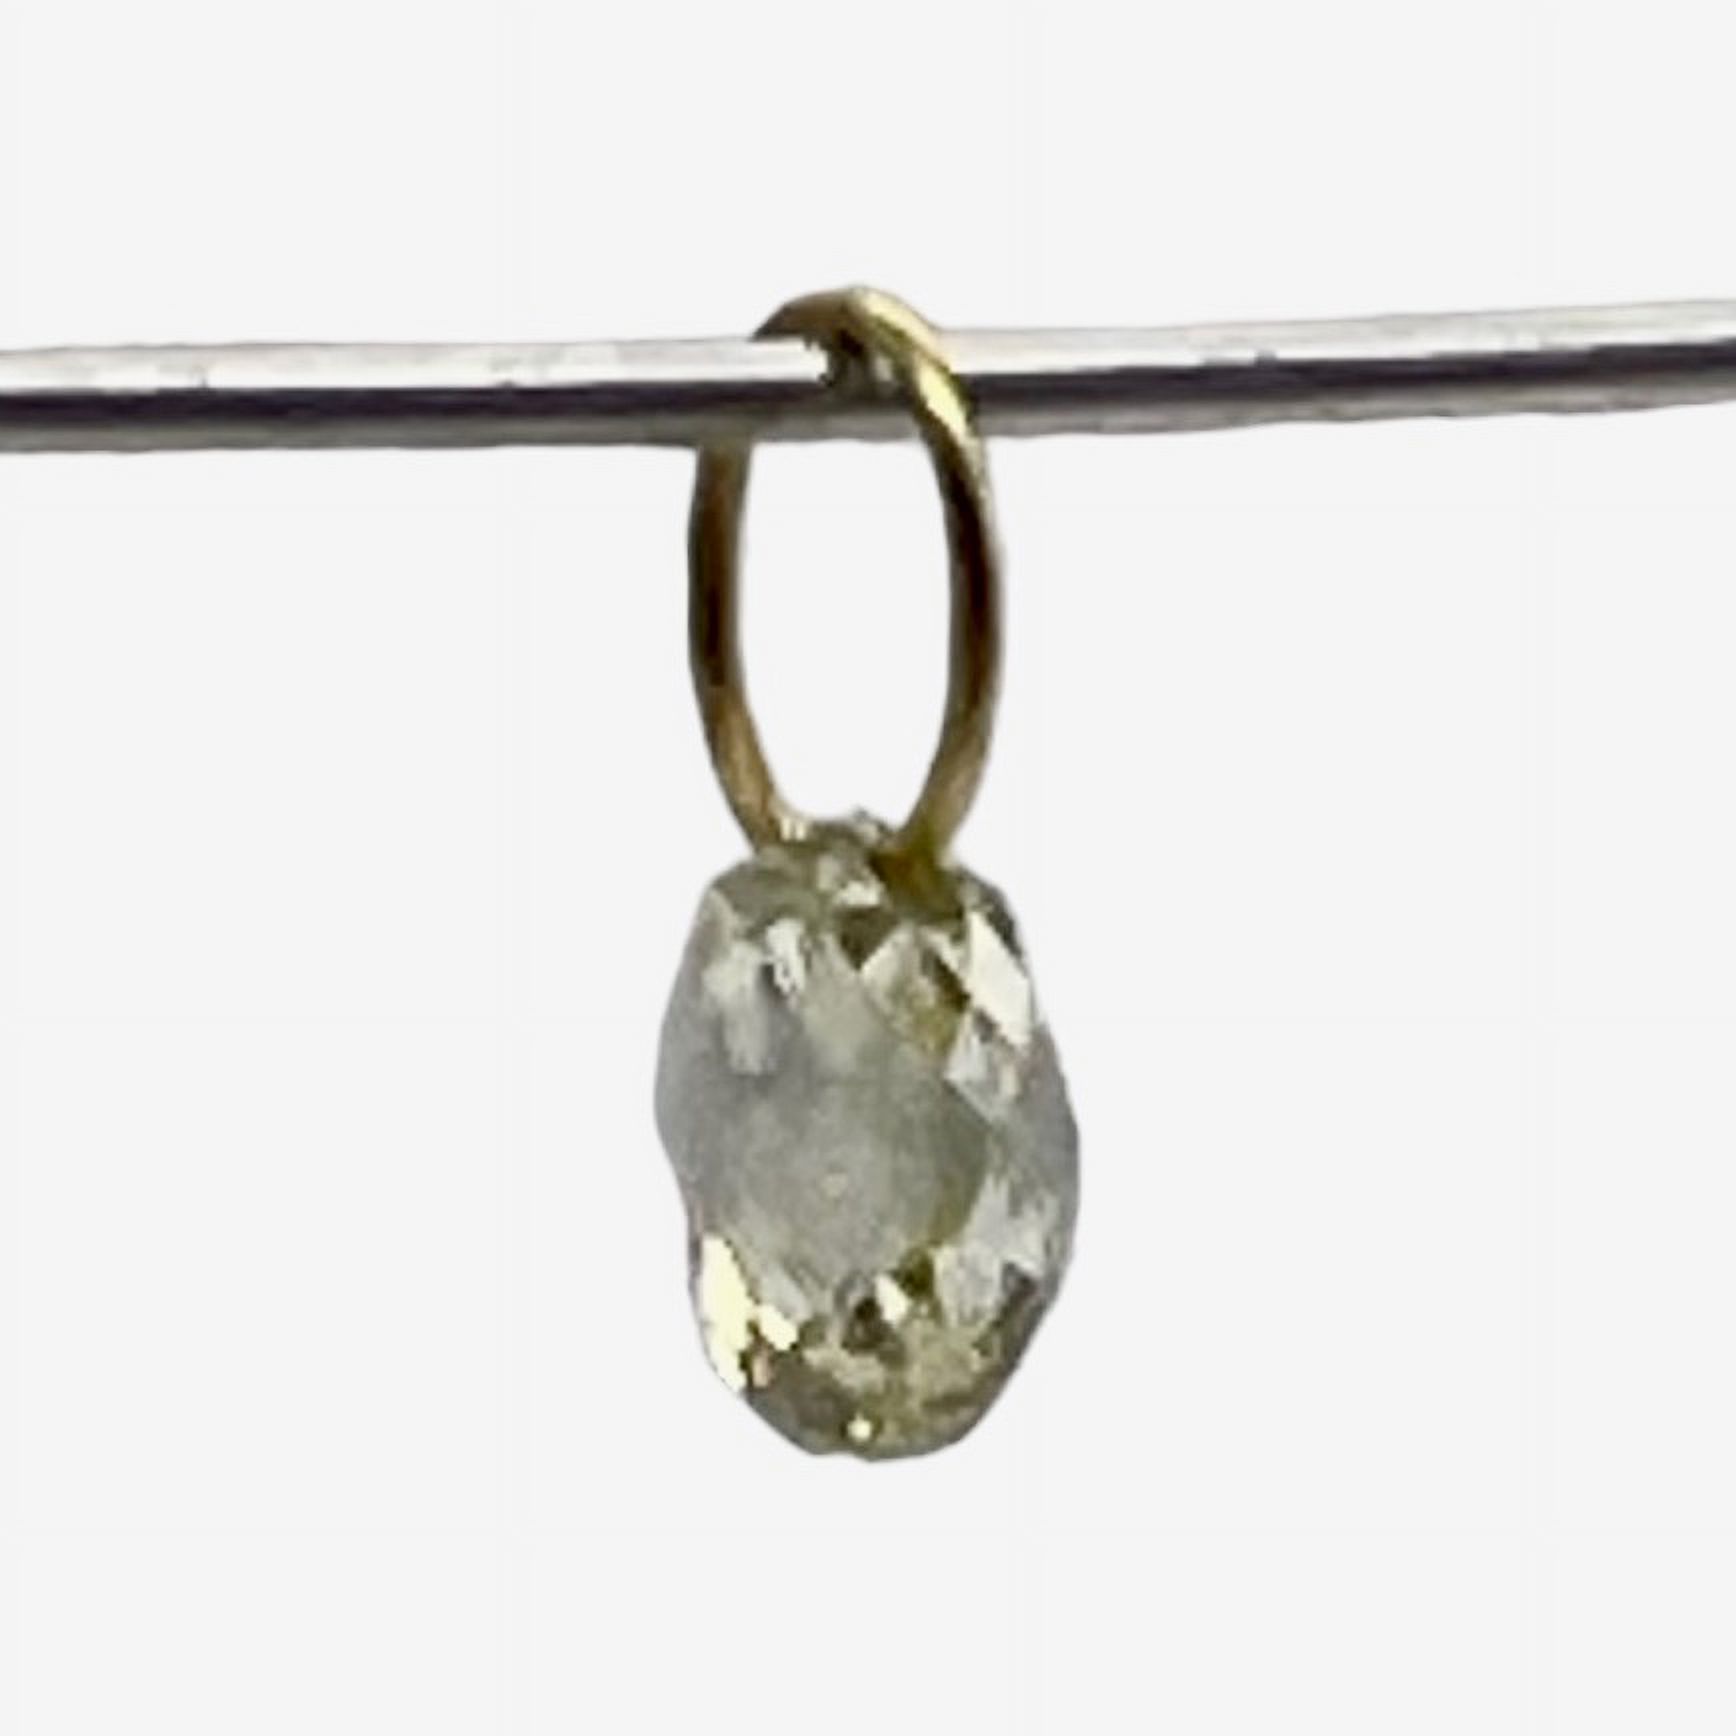 0.26cts Natural Canary Diamond & 18K Gold Pendant | 3.5x2.5x2mm | 1 Bead | - image 1 of 12